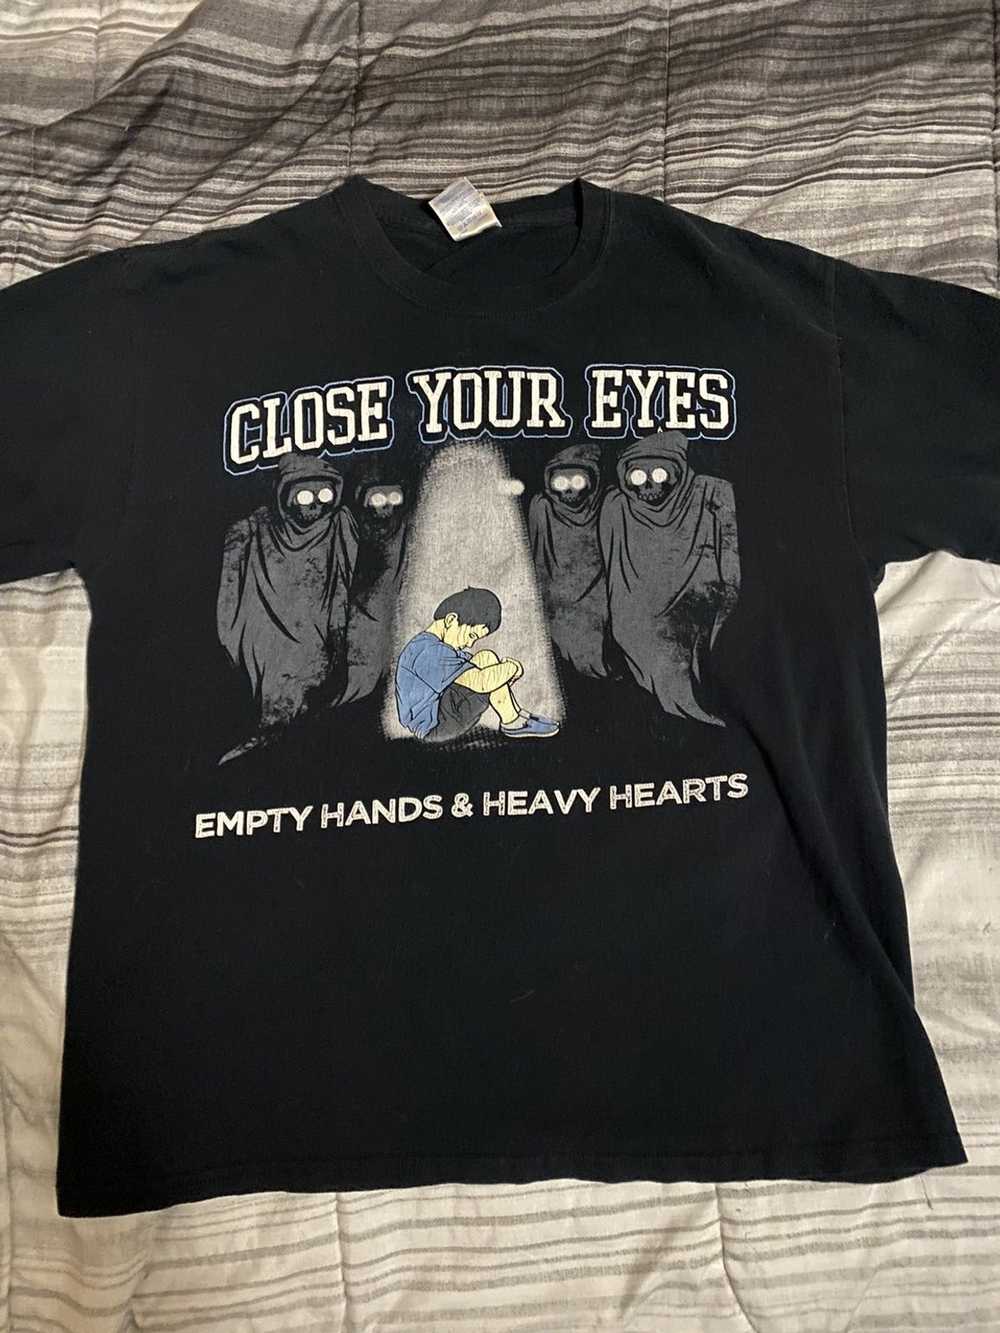 Vintage Close your eyes tee - image 1